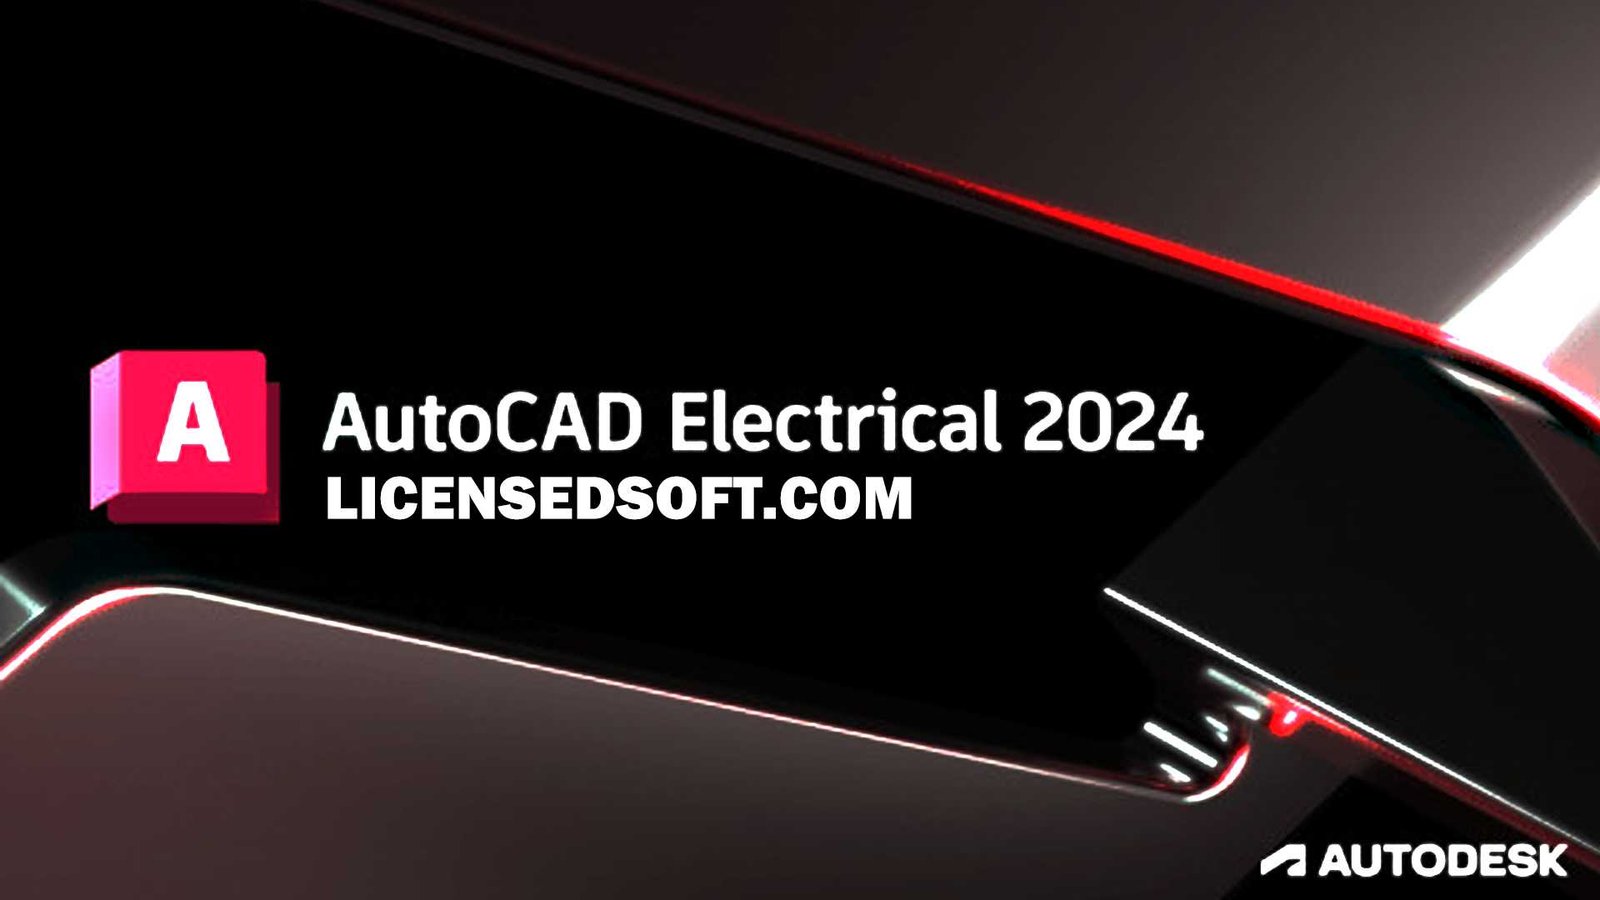 Autodesk AutoCAD Electrical 2024 Cover By LicensedSoft